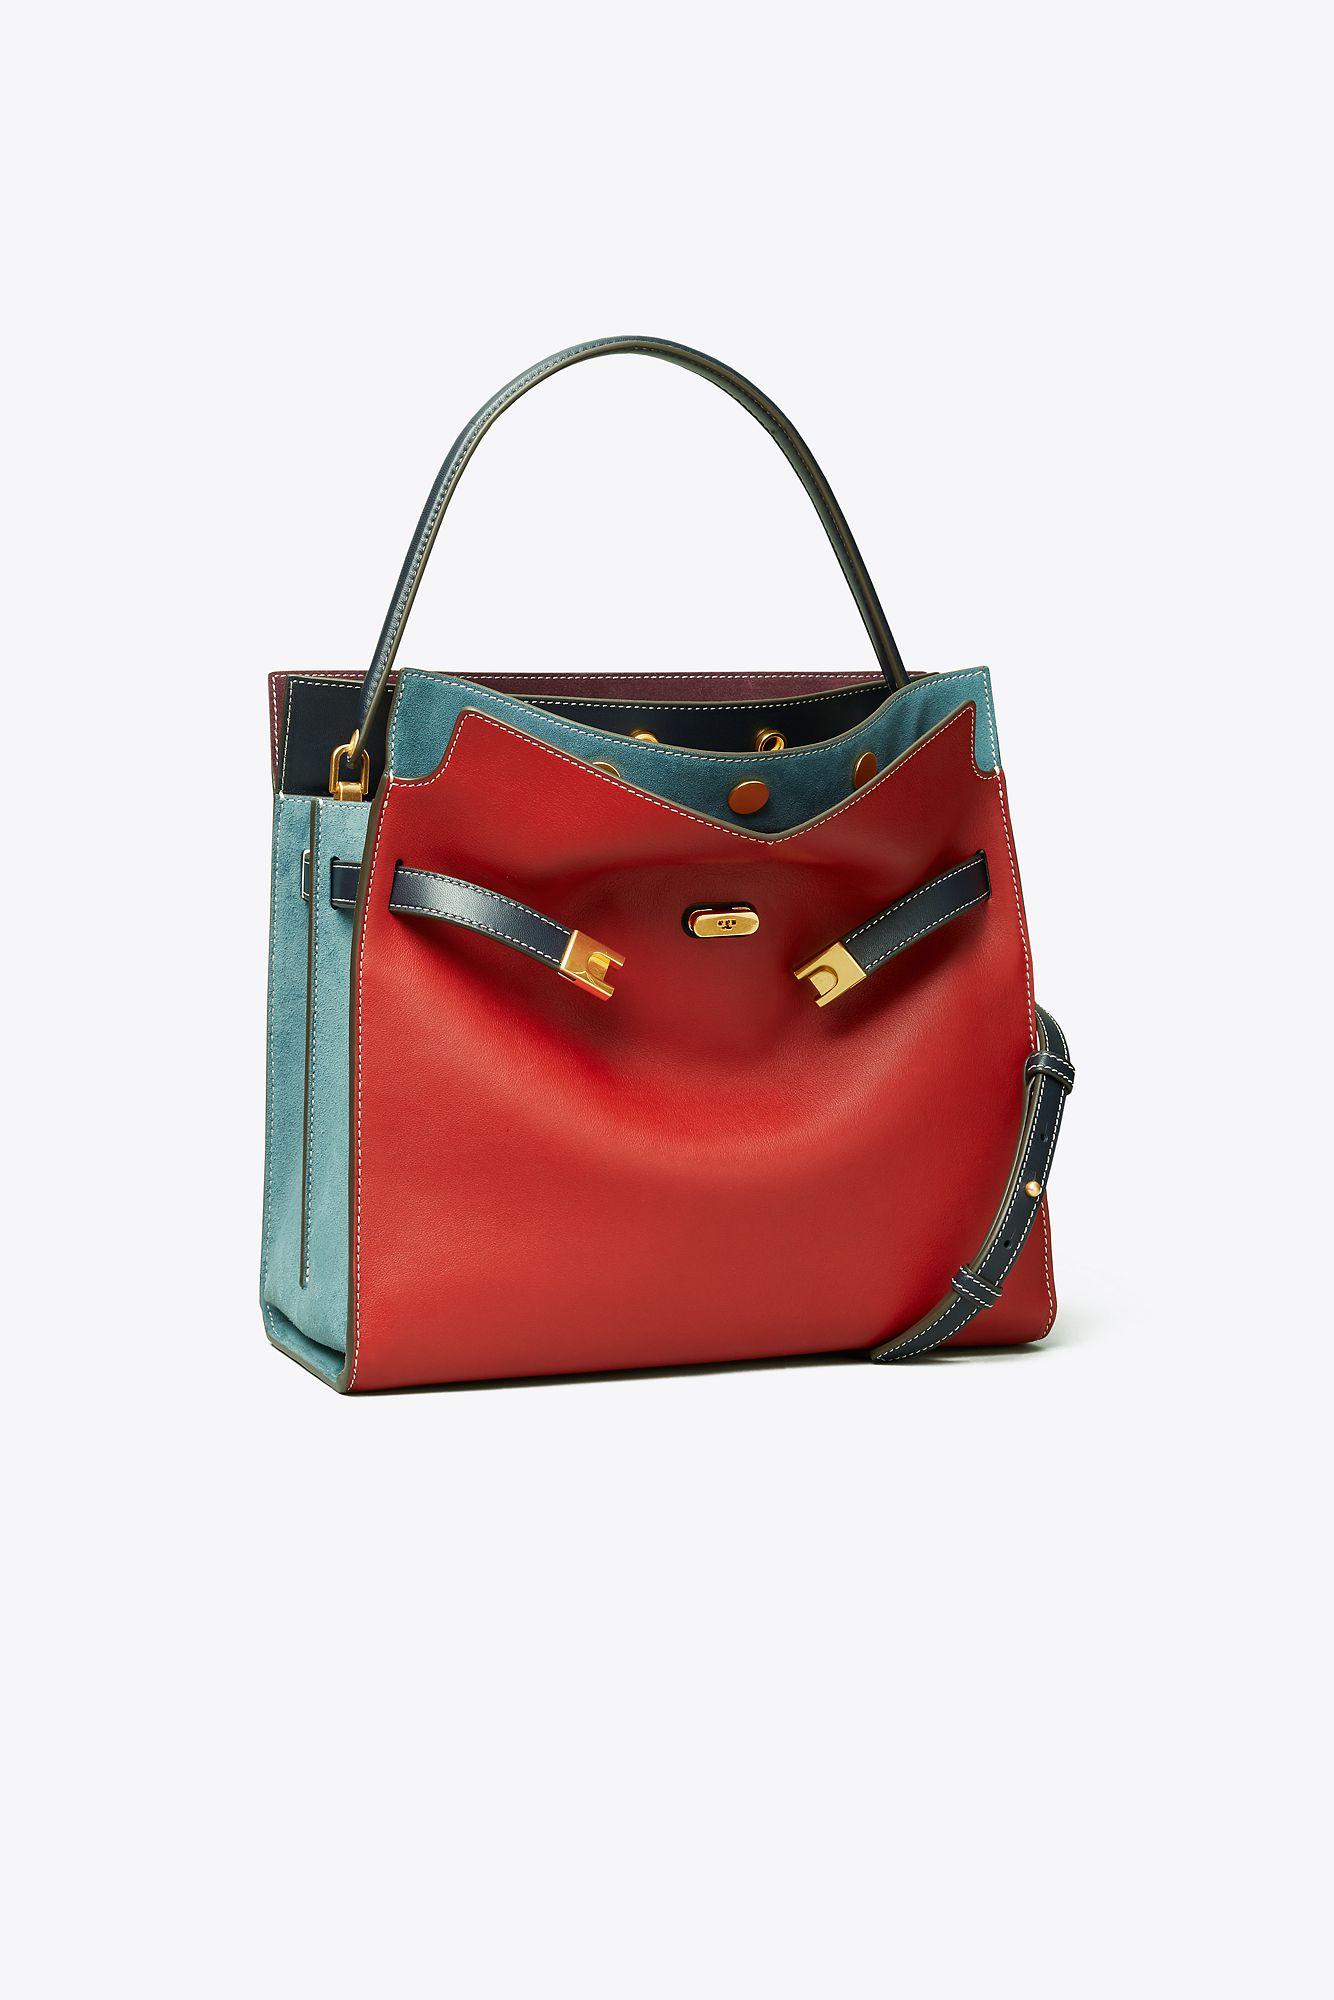 Tory Burch Lee Radziwill Two-tone Tote Bag in Red